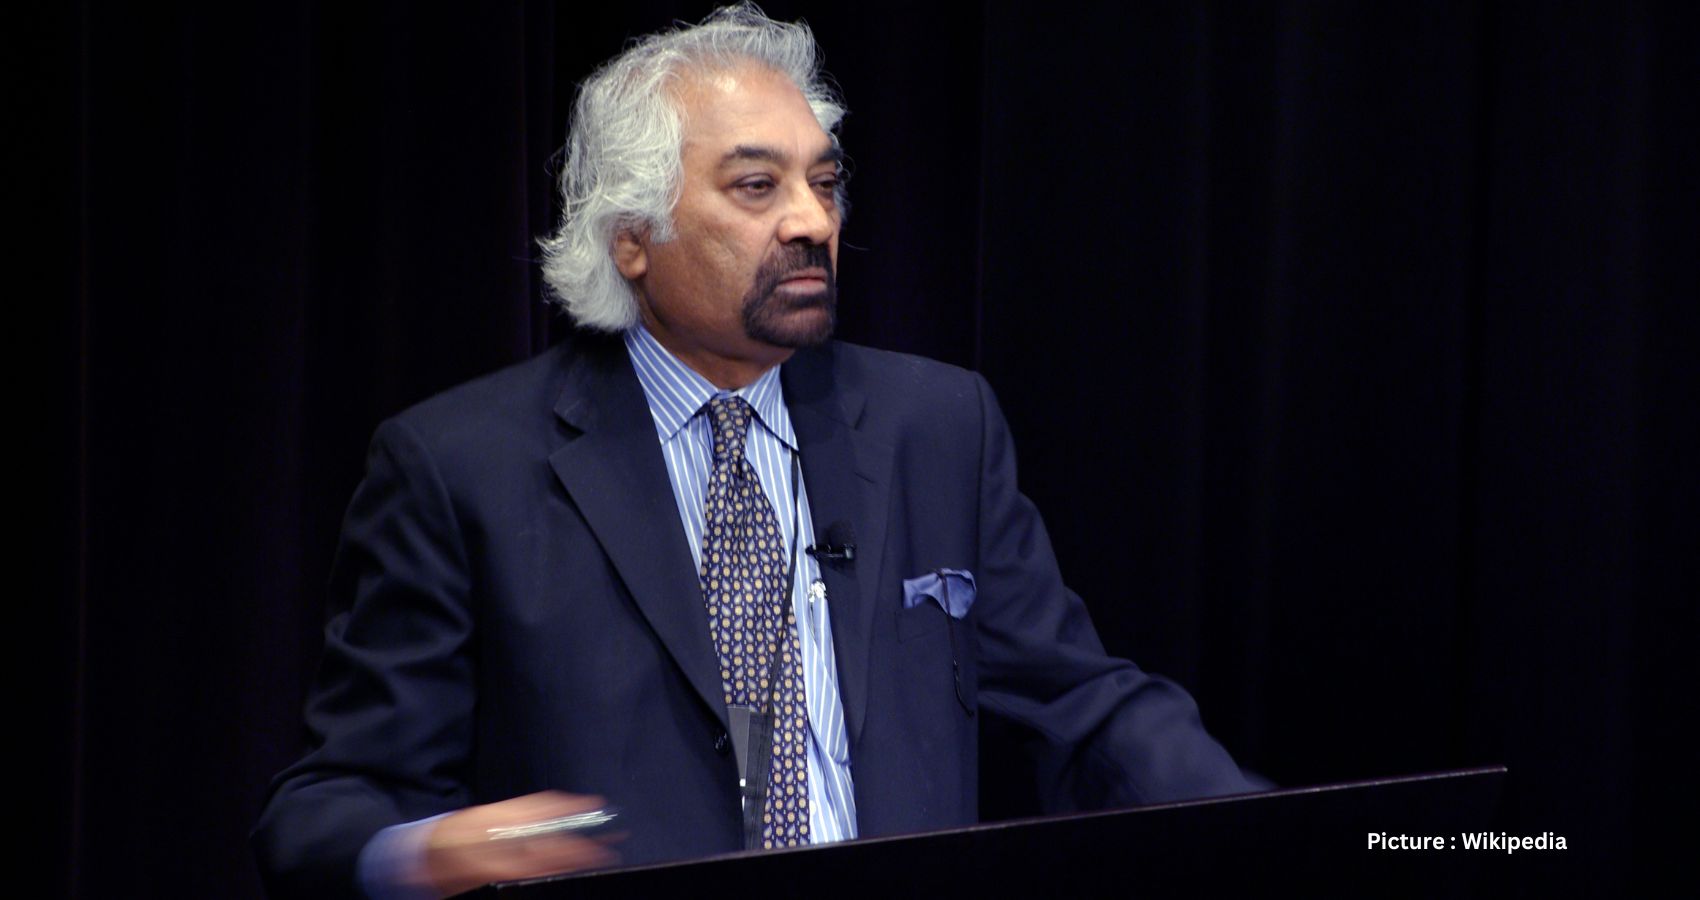 Featured & Cover Sam Pitroda Resigns as Indian Overseas Congress Chairman Amid Controversial Remarks